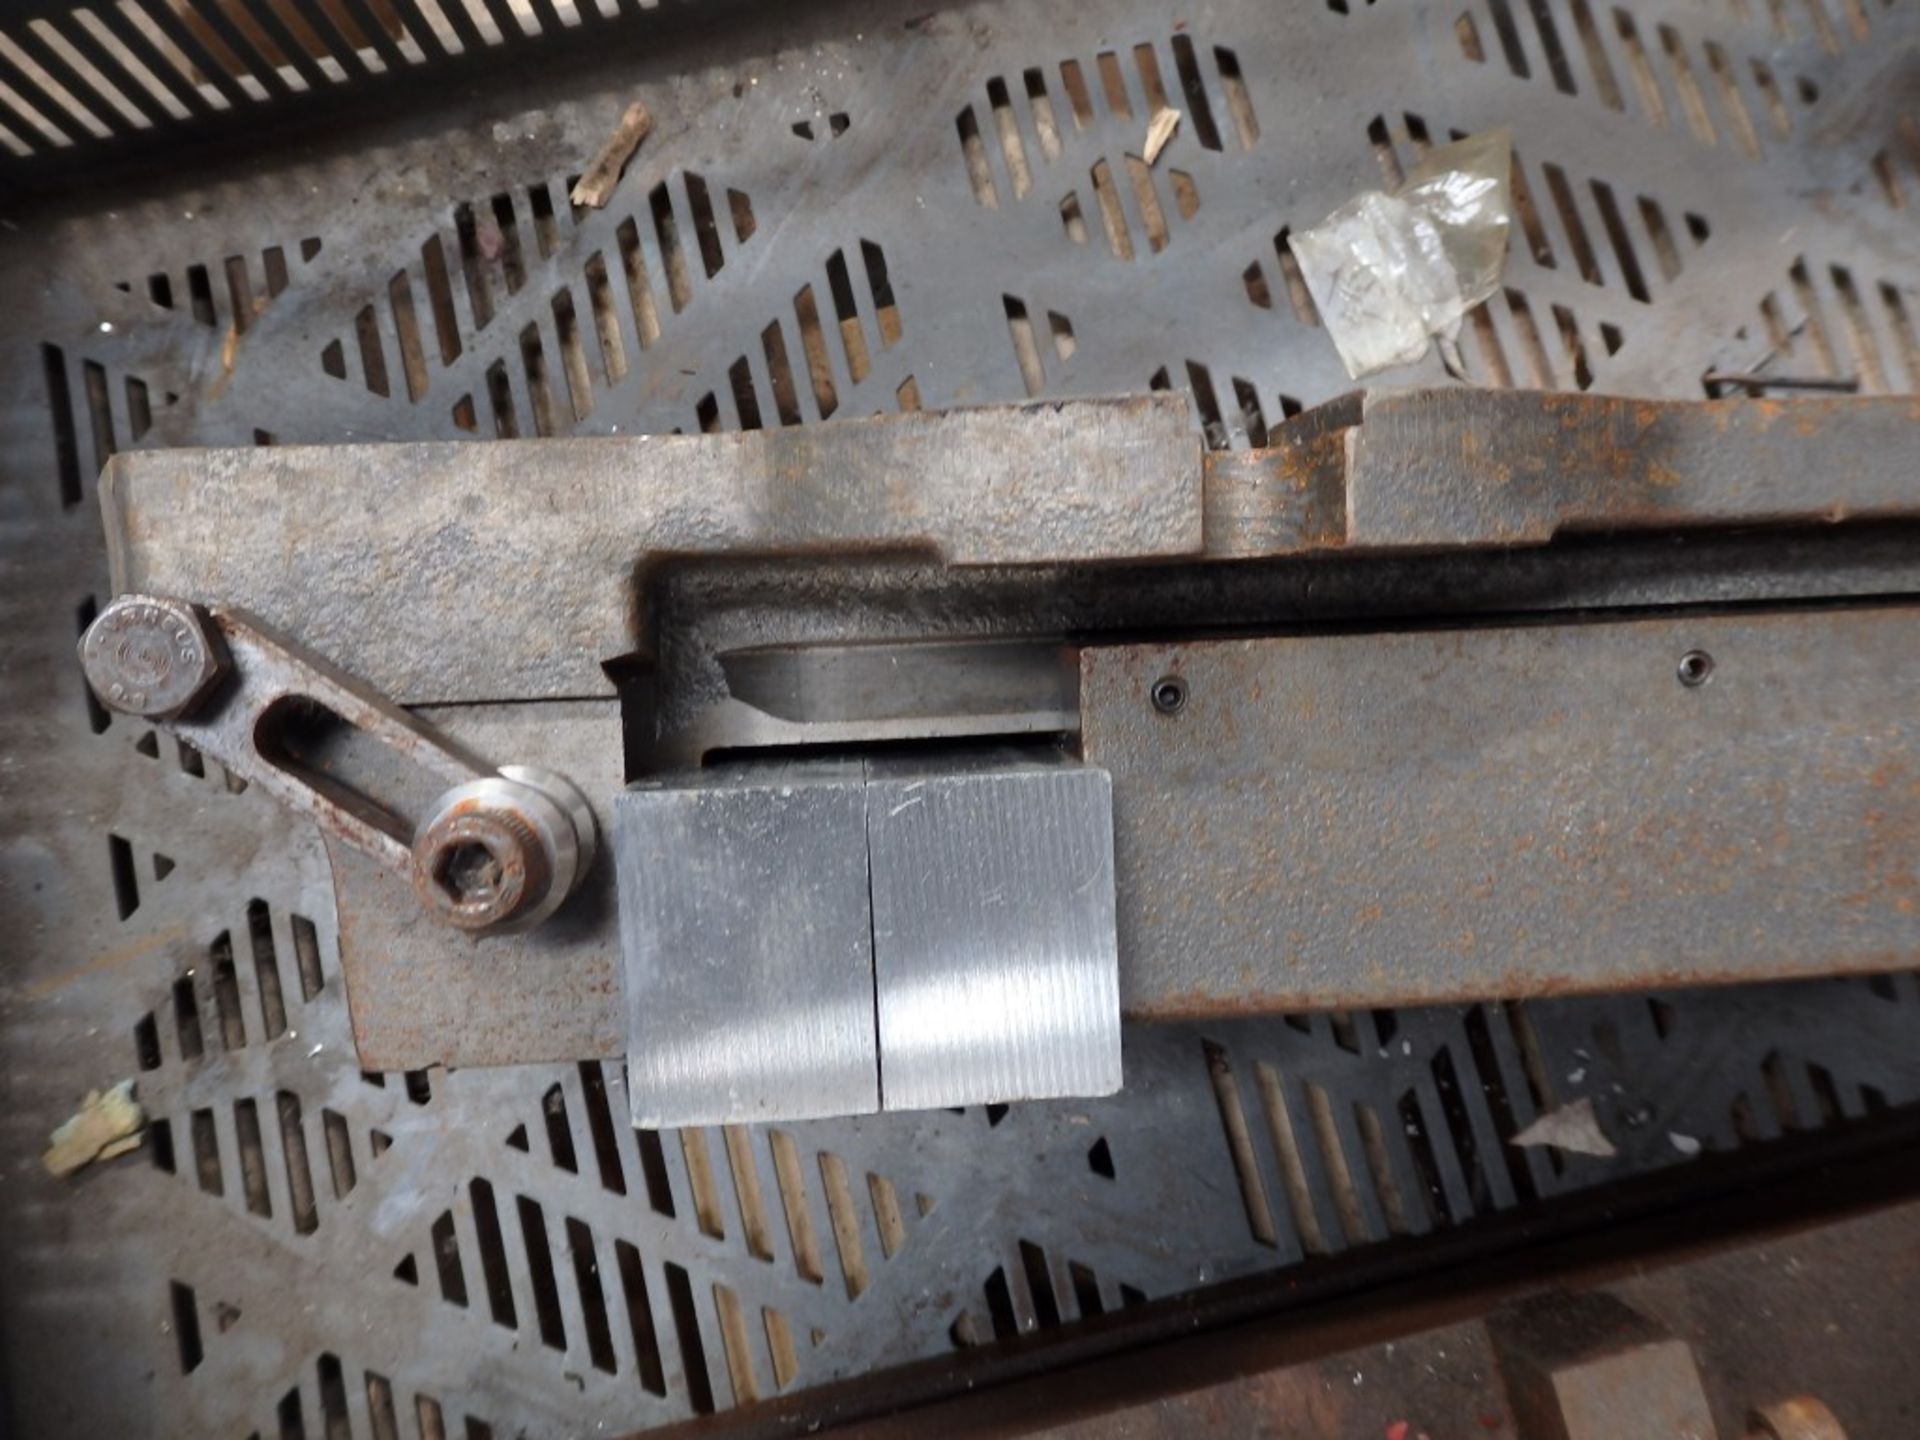 1 x Large Machine Vise - Untested Says Broken - Length 50cm x Width 20cm x Height 10cm - CL057 - - Image 6 of 6